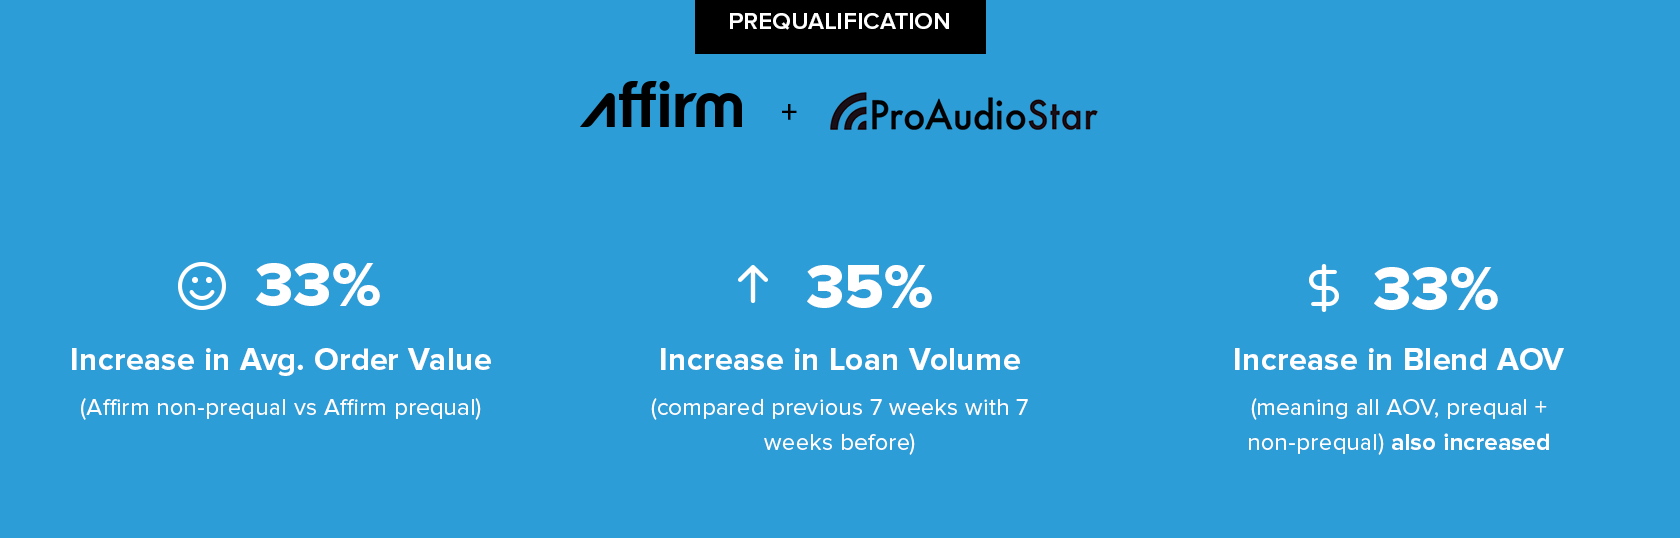 Introducing Affirm Prequalification - Image 2